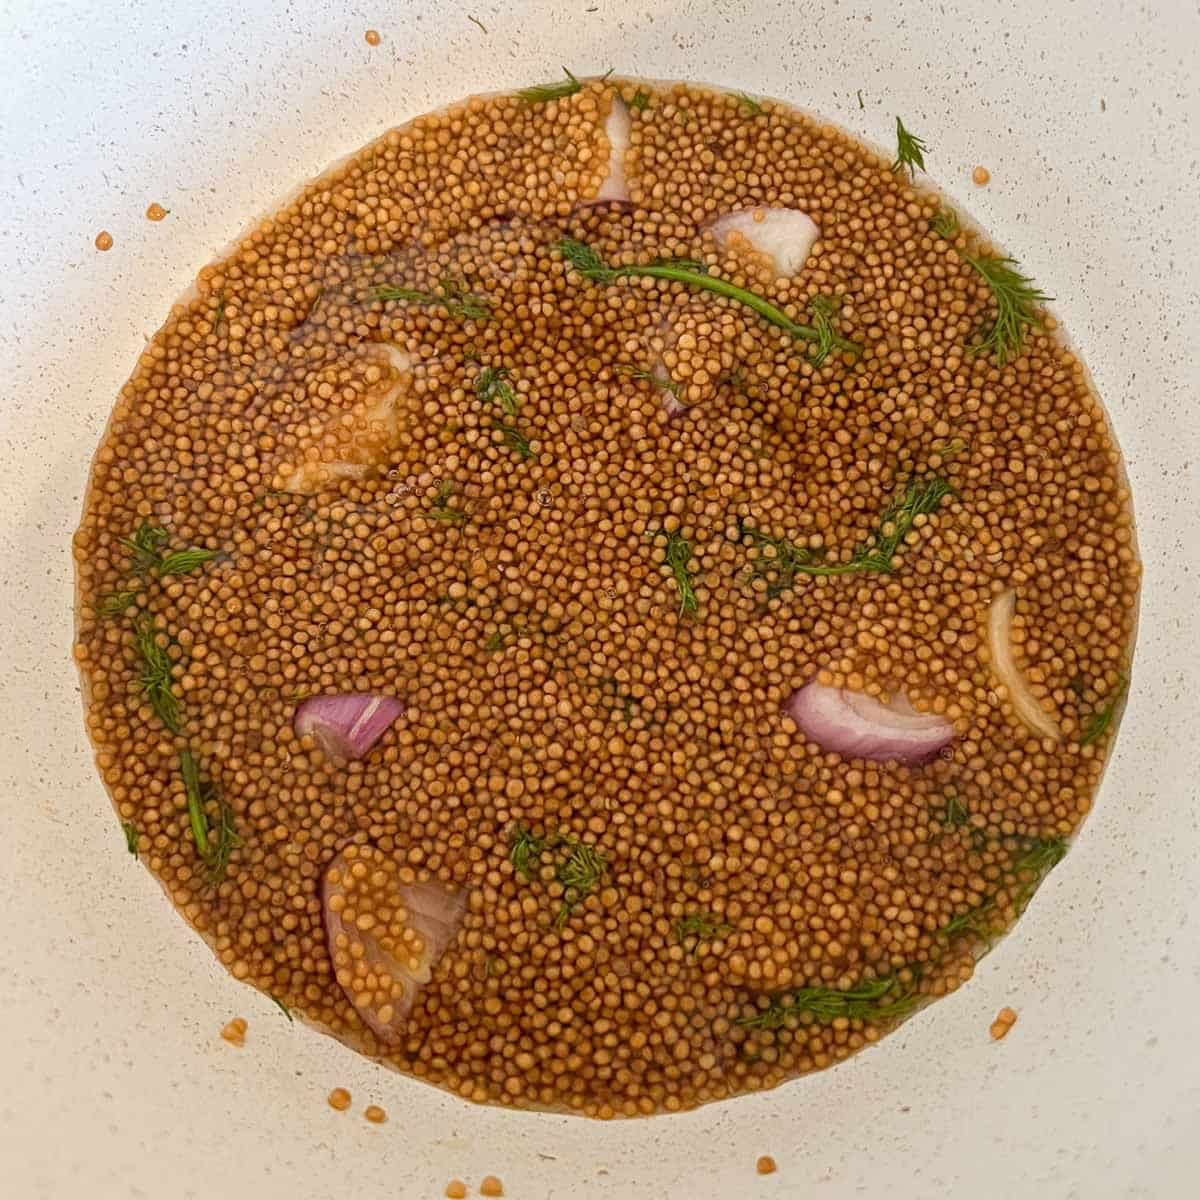 pickled mustard seeds with aromatics mixed in